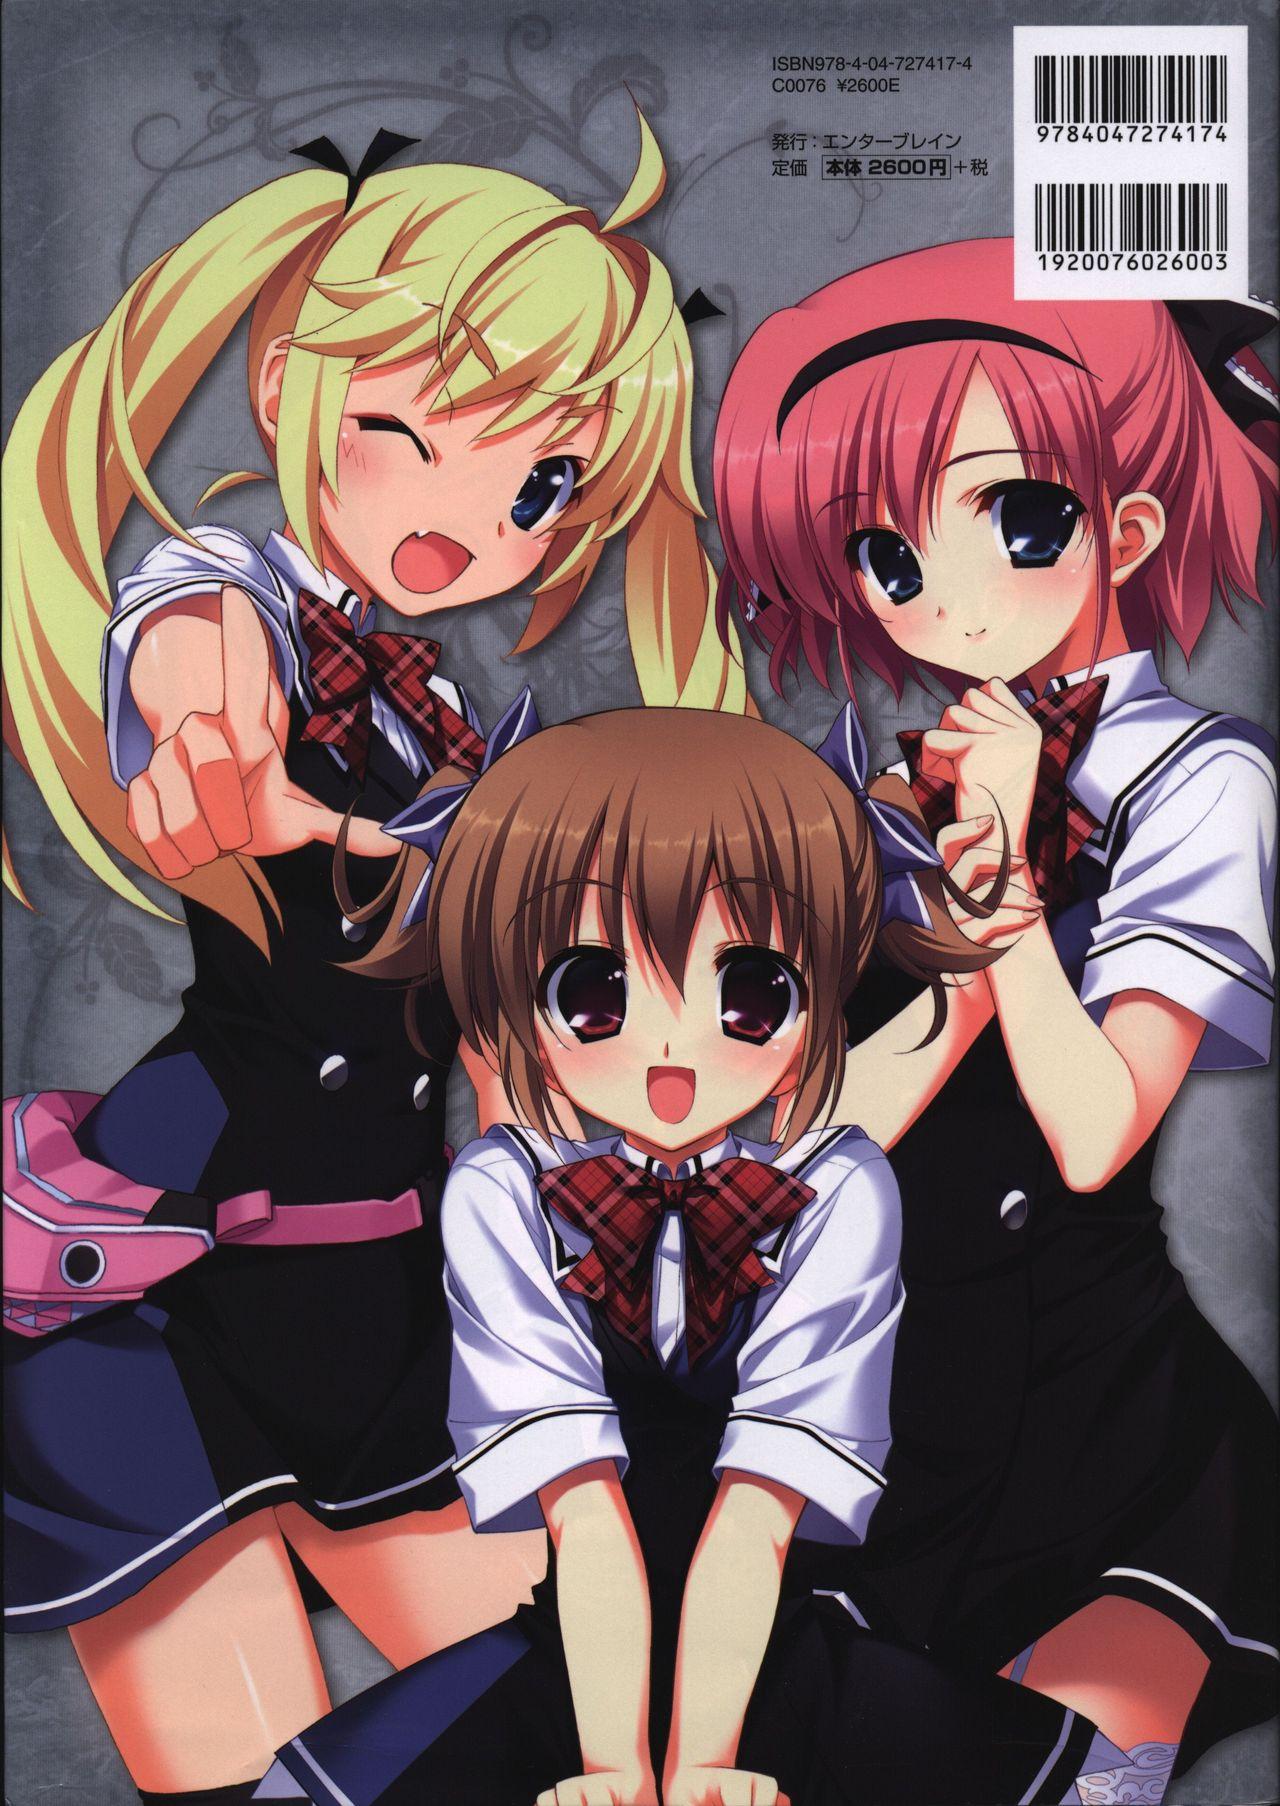 The Fruit of Grisaia Visual FanBook 161